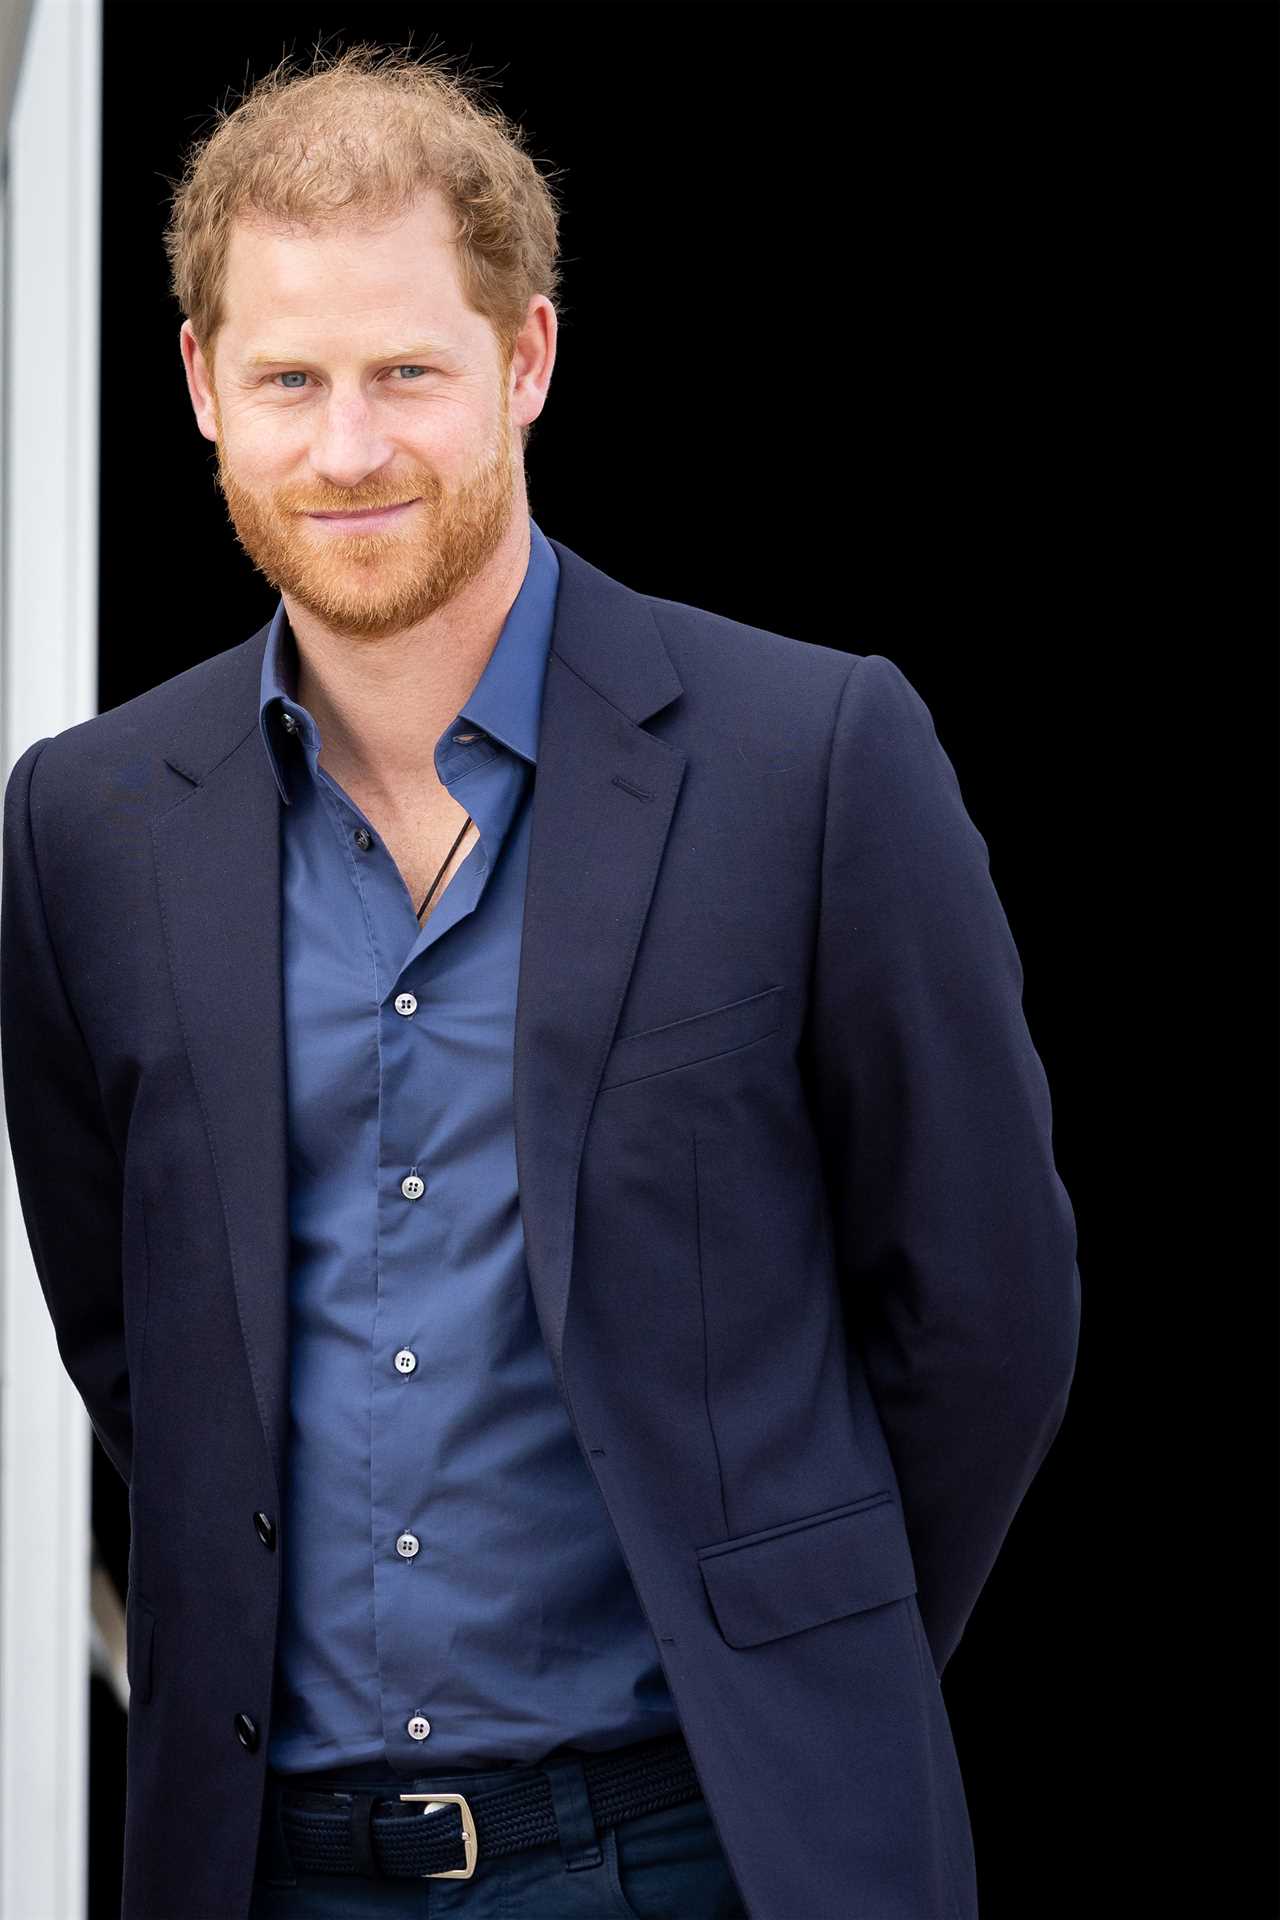 Fury as ‘outrageous’ US government refuses to reveal details of Prince Harry’s visa application on privacy grounds